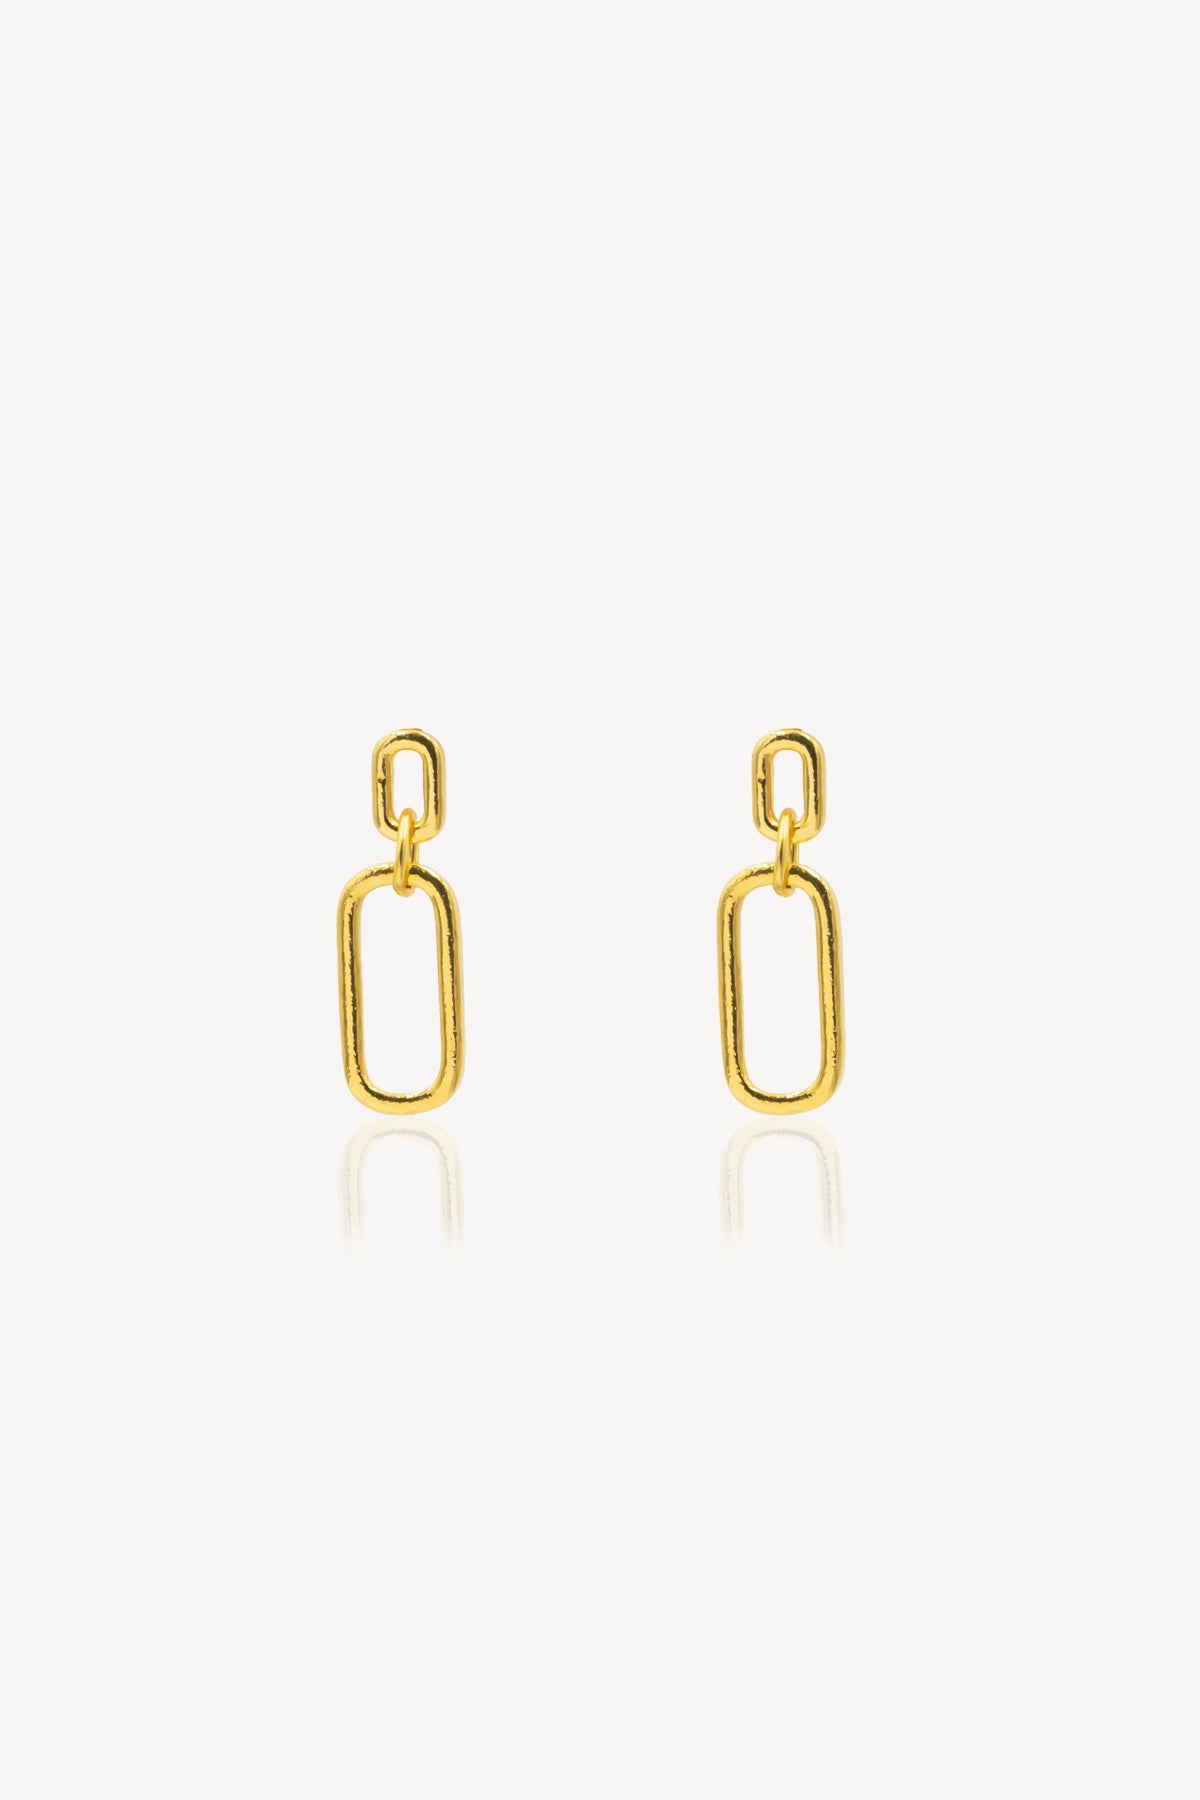 916 Gold for woman ear studs